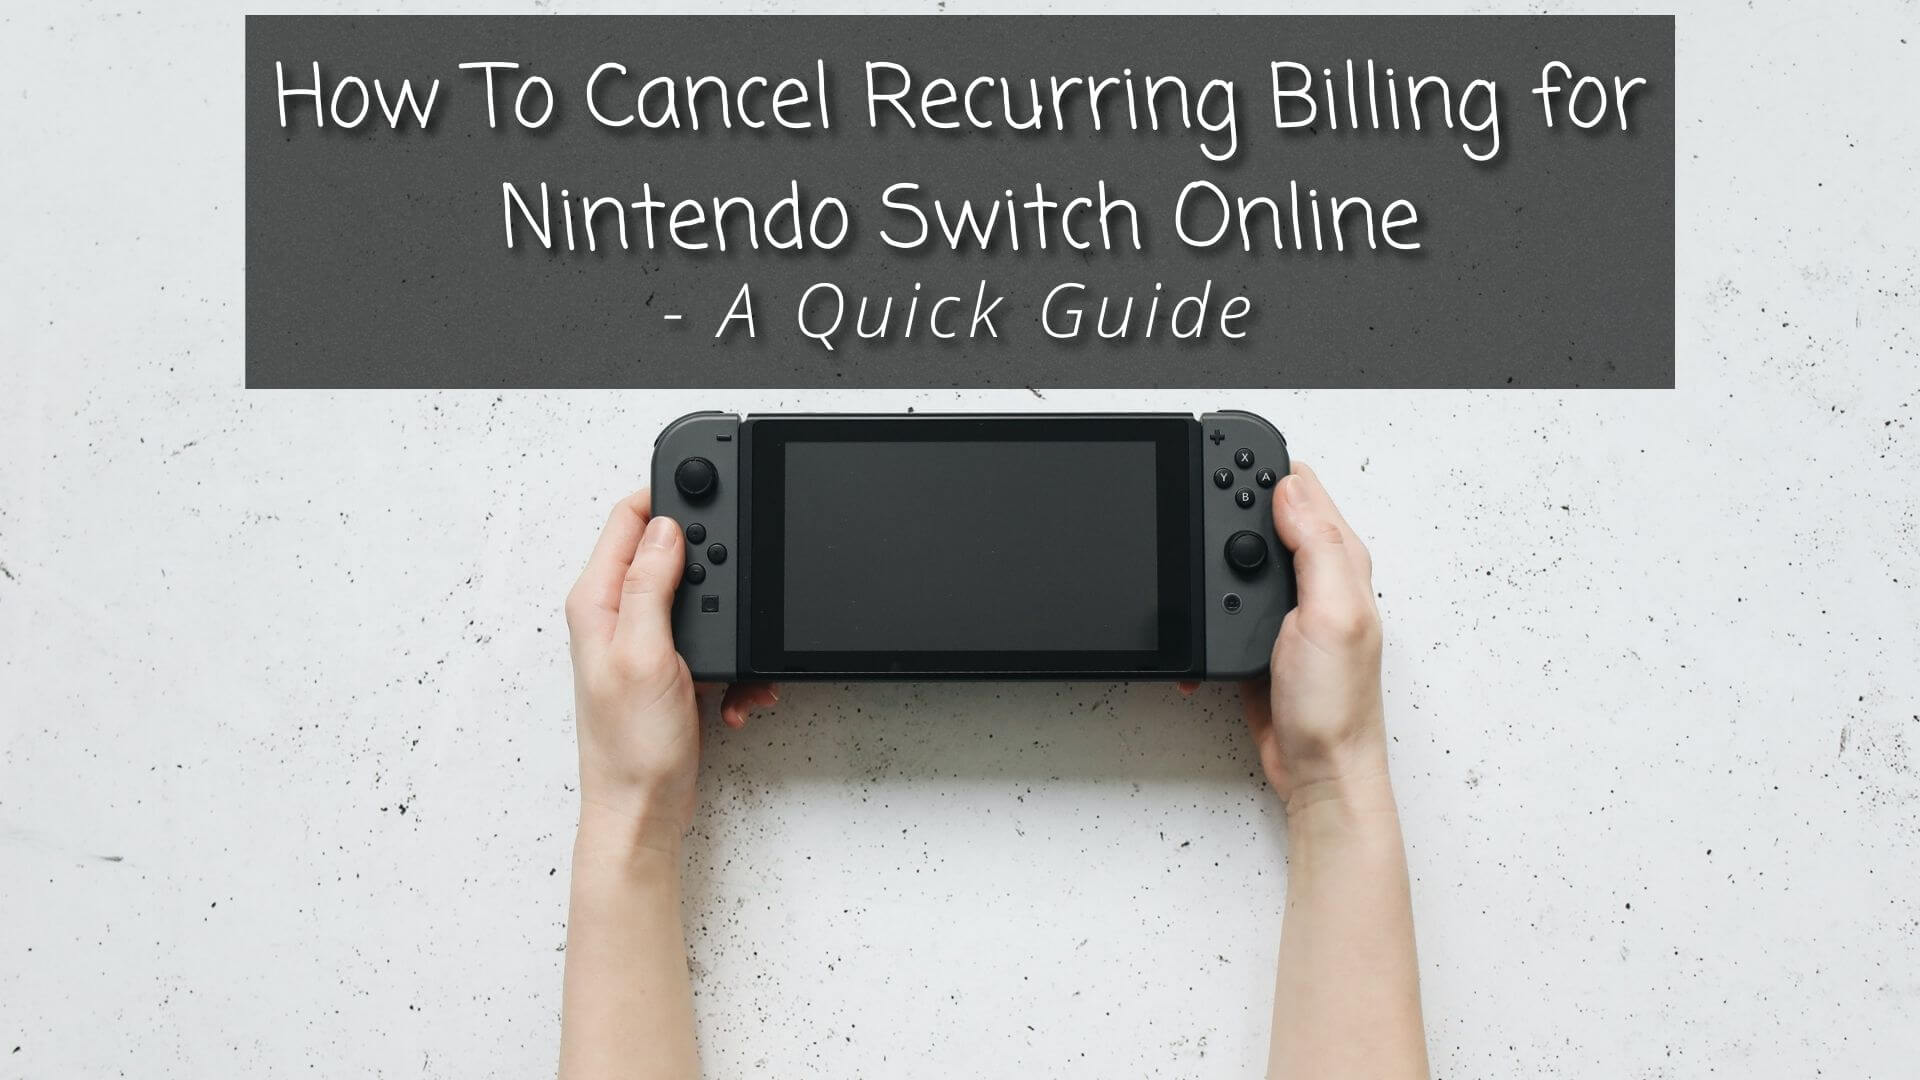 Are you looking to cancel your recurring billing subscription for Nintendo Switch Online? Here's how to cancel your subscription with ease.